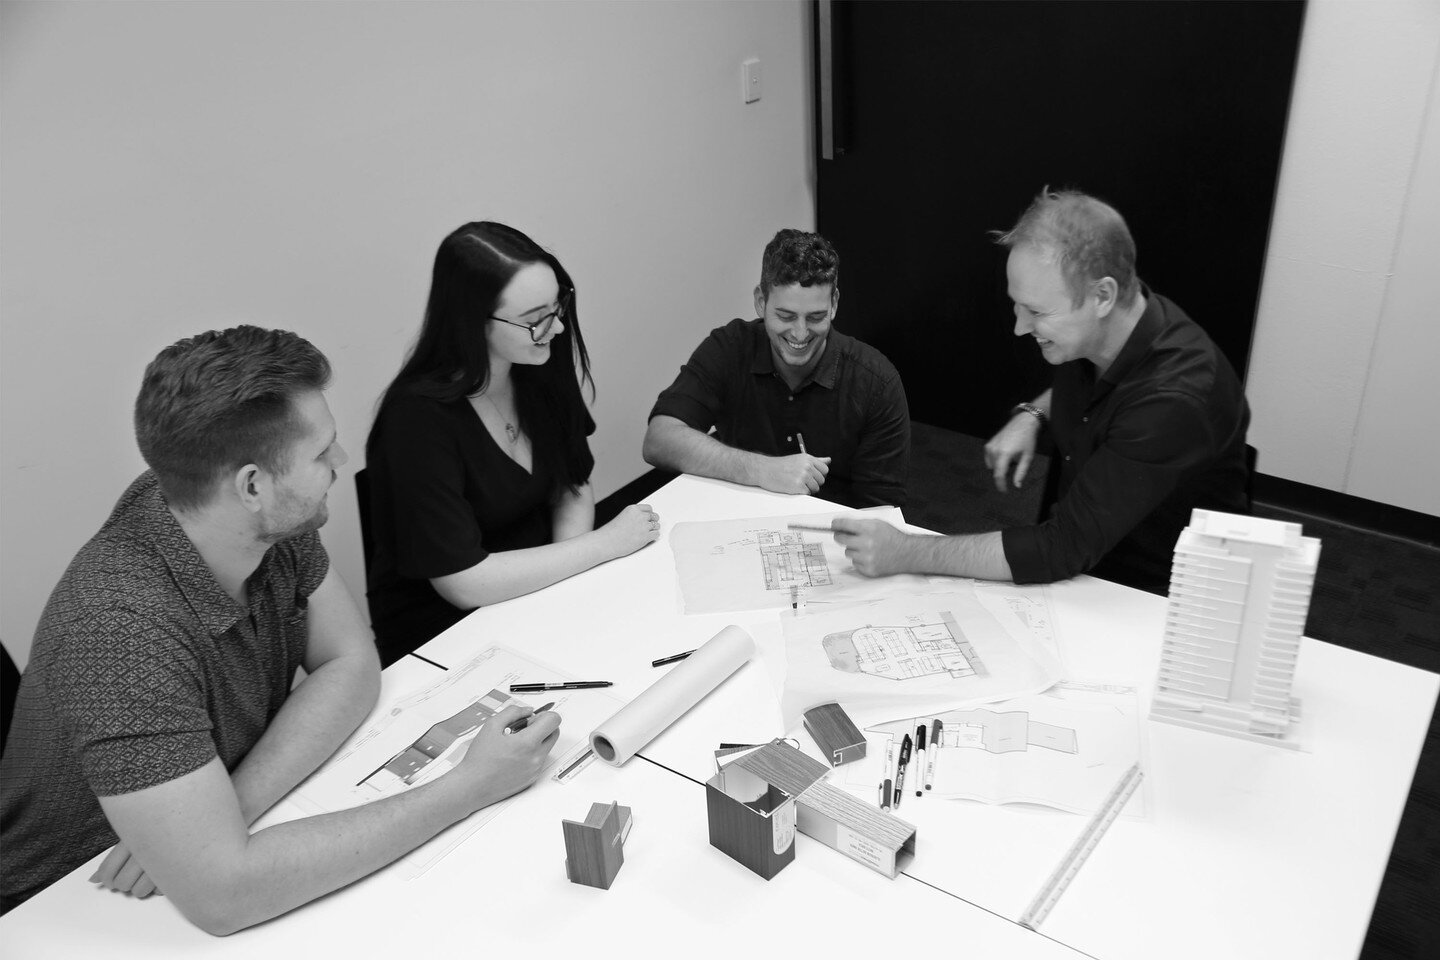 Driven by curiosity, collaboration and innovation, MODE Design endeavours to deliver the best possible outcome to engage communities, activate spaces and build better facilities that meets the needs of real people.⁠ #MannerMethodForm⁠
-⁠
#goldcoastar